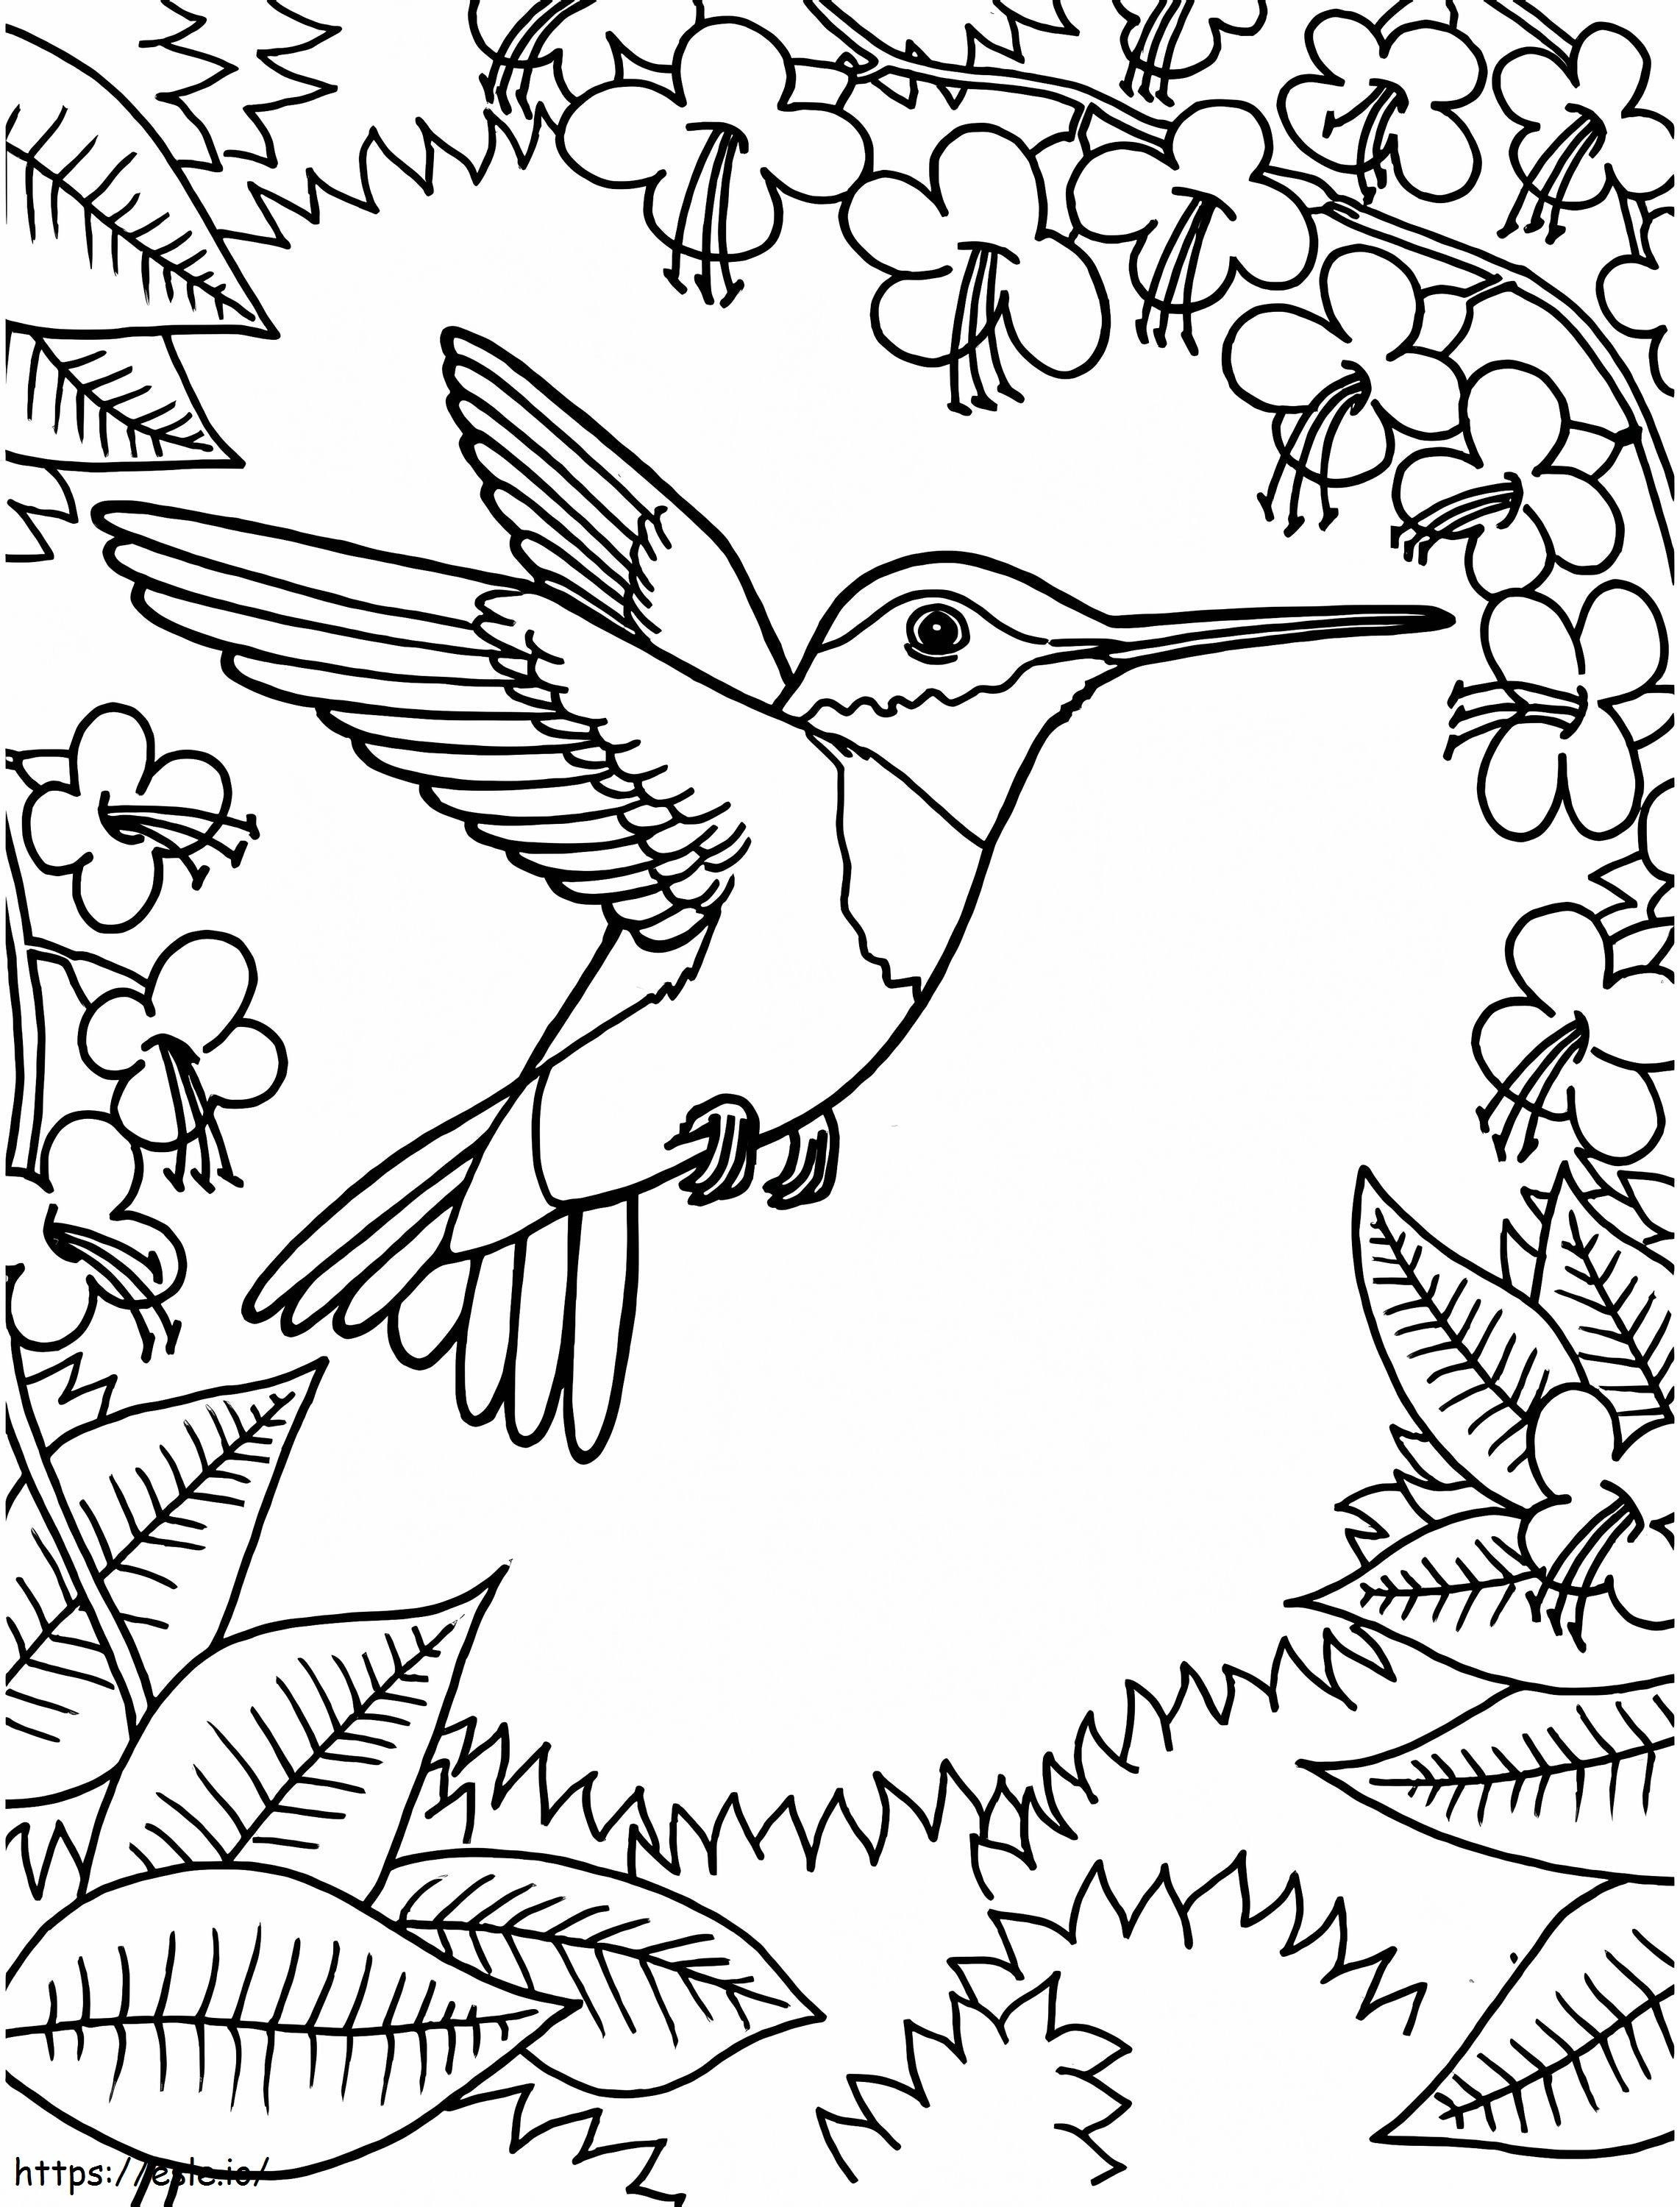 Hummingbird Is For Adults coloring page